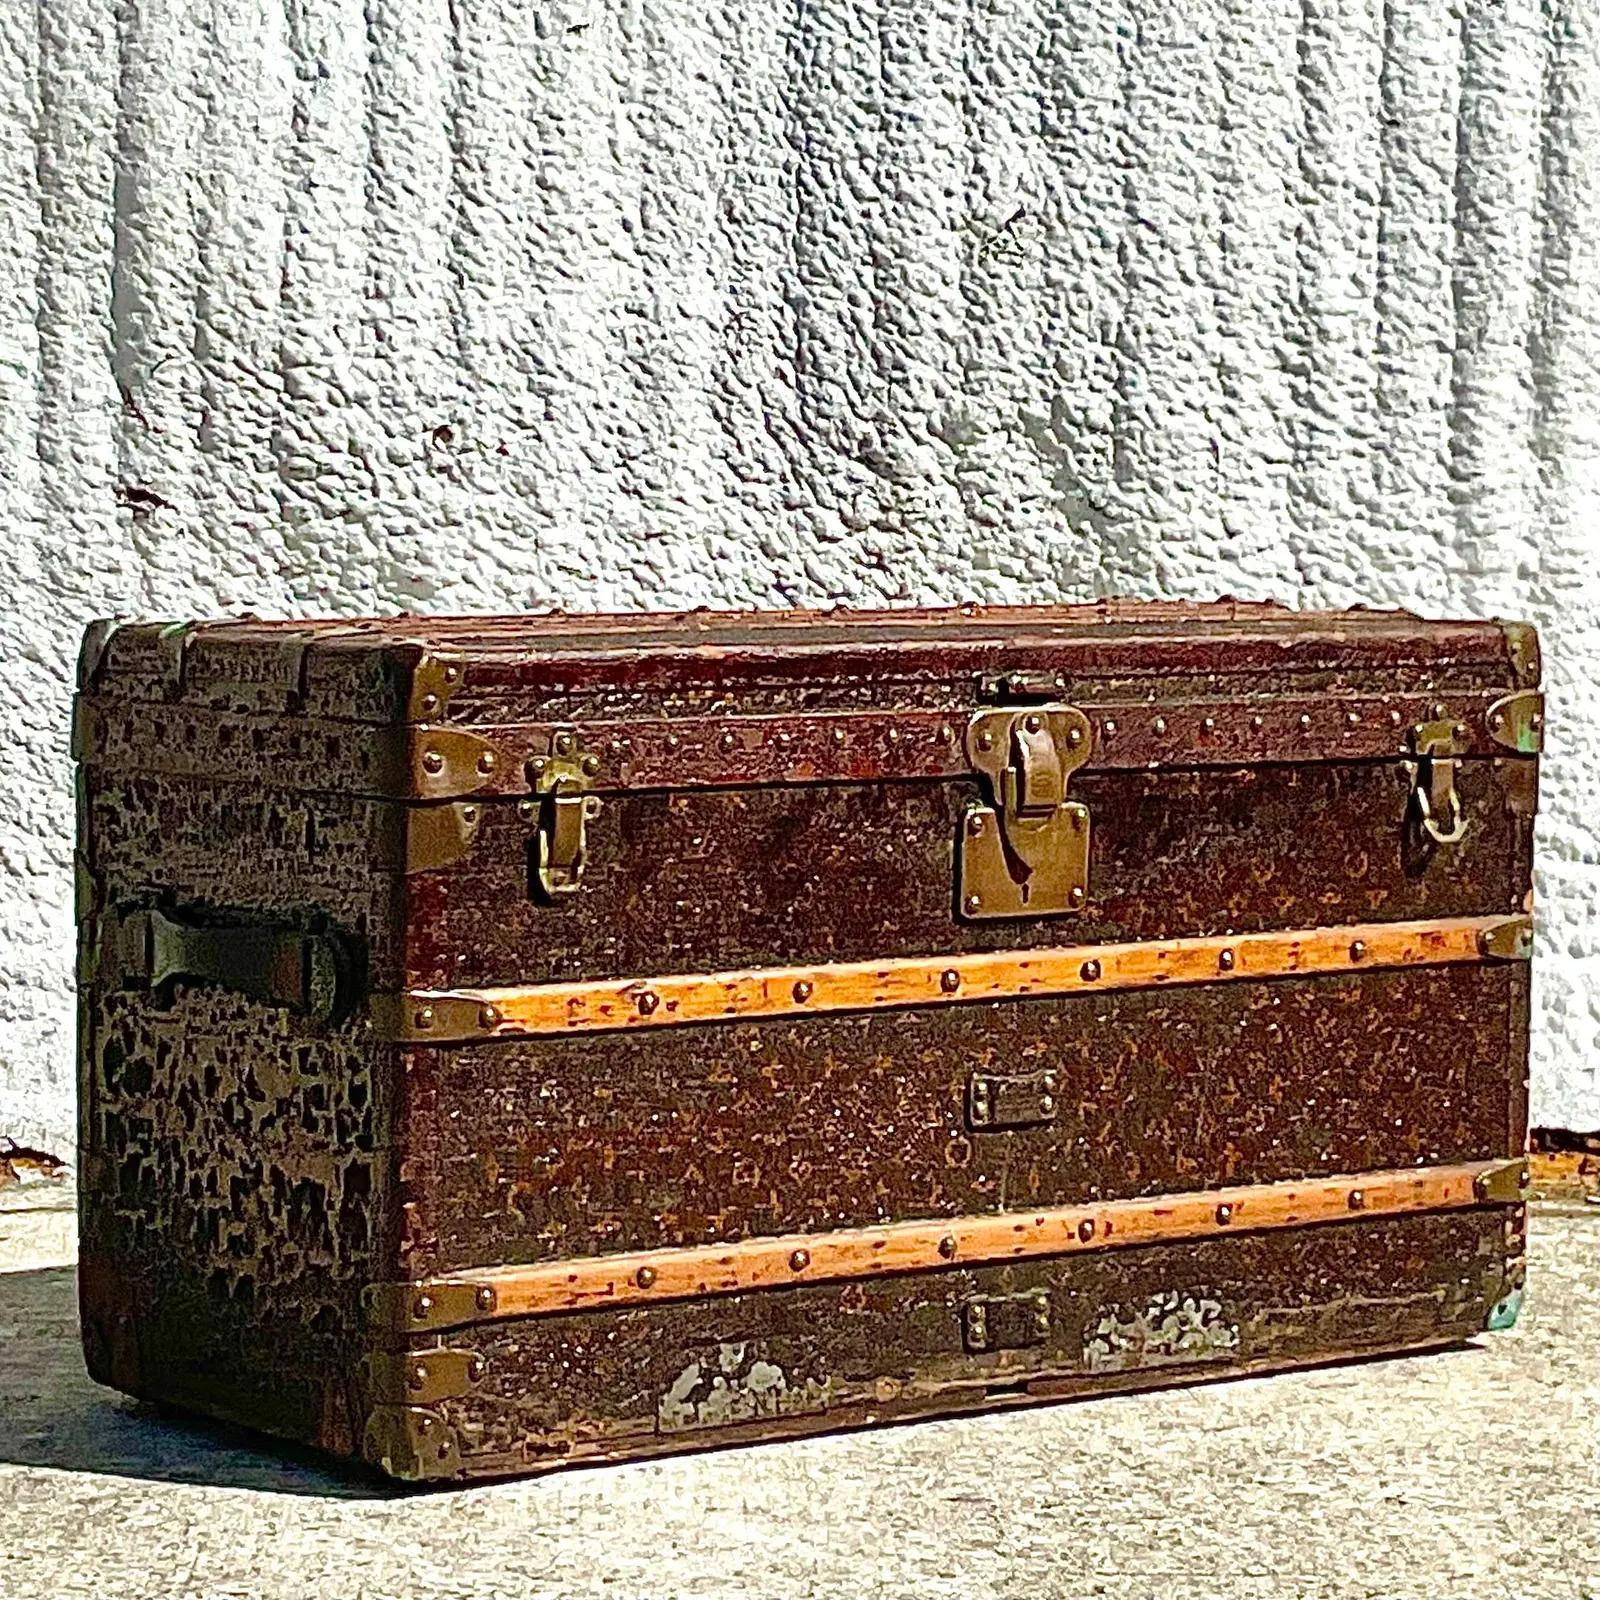 A spectacular vintage Boho Steamer trunk. Made by the prestigious Louis Vuitton group. All over patina from time and use. This is a well loved trunk! Marked on the lock. Three interior stacking shelves. Acquired from a Palm Beach estate.

The